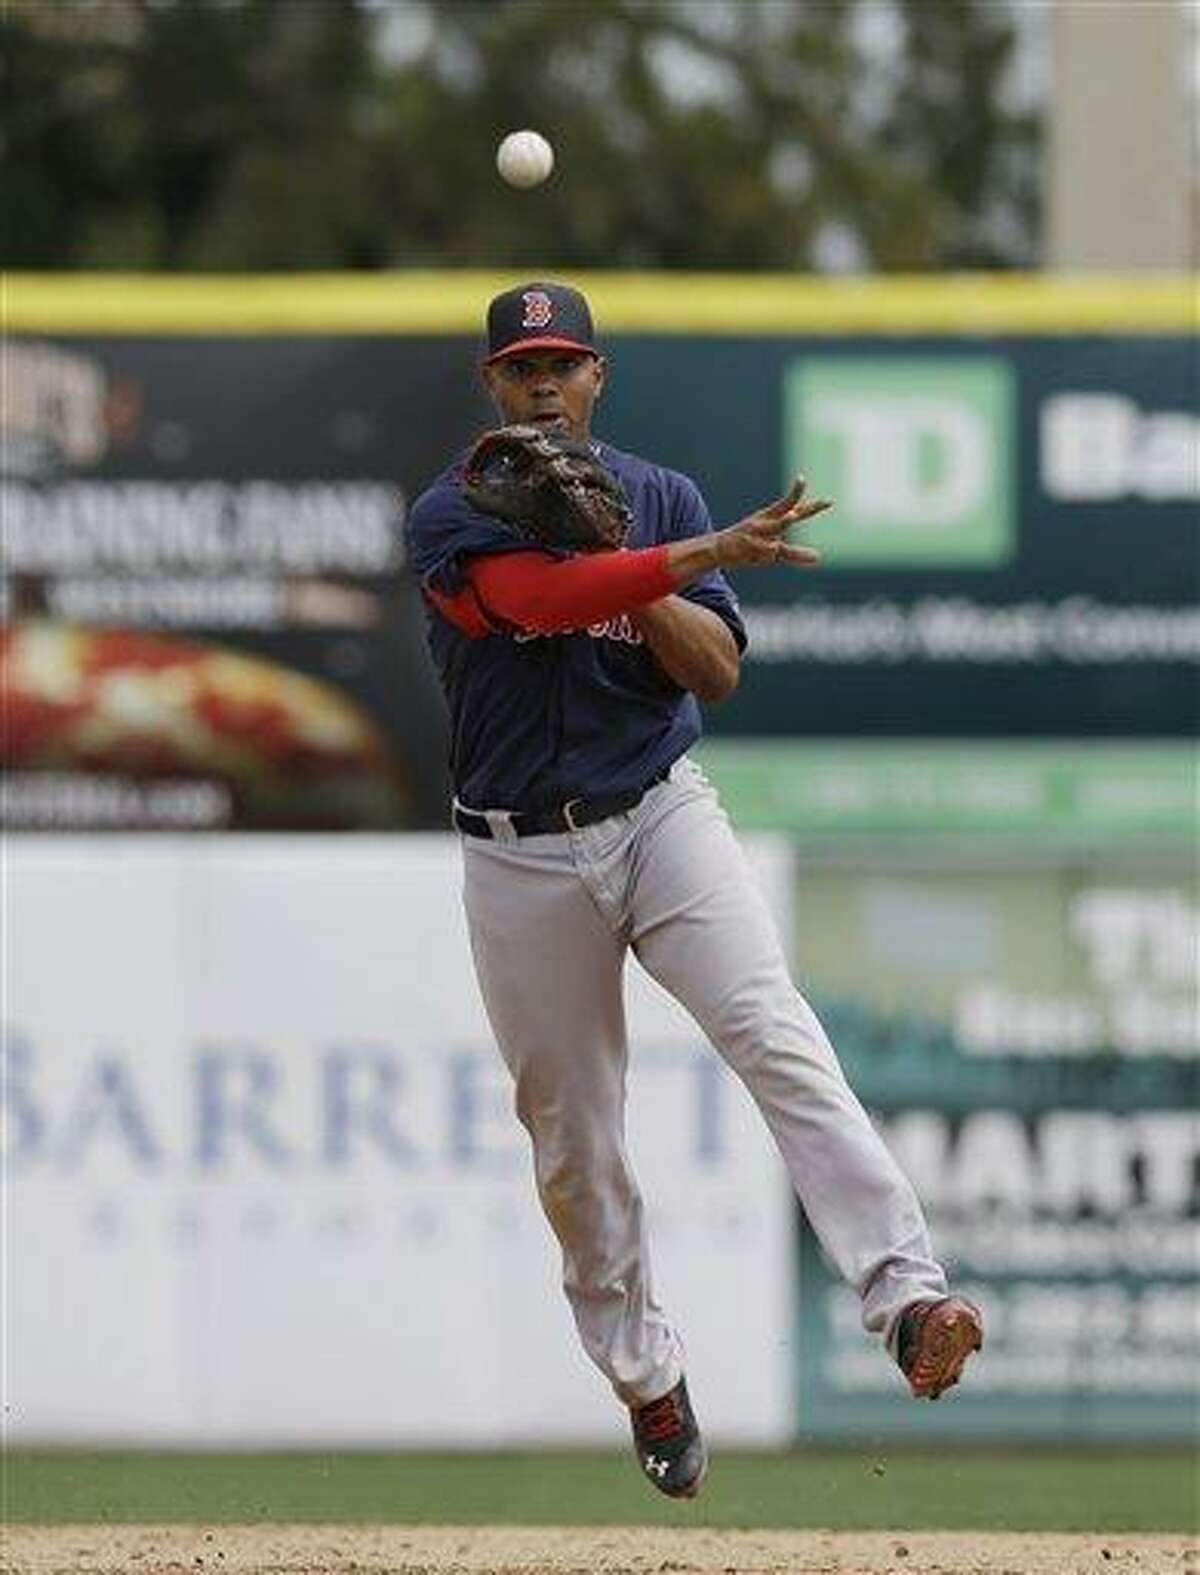 Boston Red Sox shortstop Xander Bogaerts (72) throws to first for a putout in a spring training baseball game against the Toronto Blue Jays in Dunedin, Fla., Friday, March 22, 2013. (AP Photo/Kathy Willens)